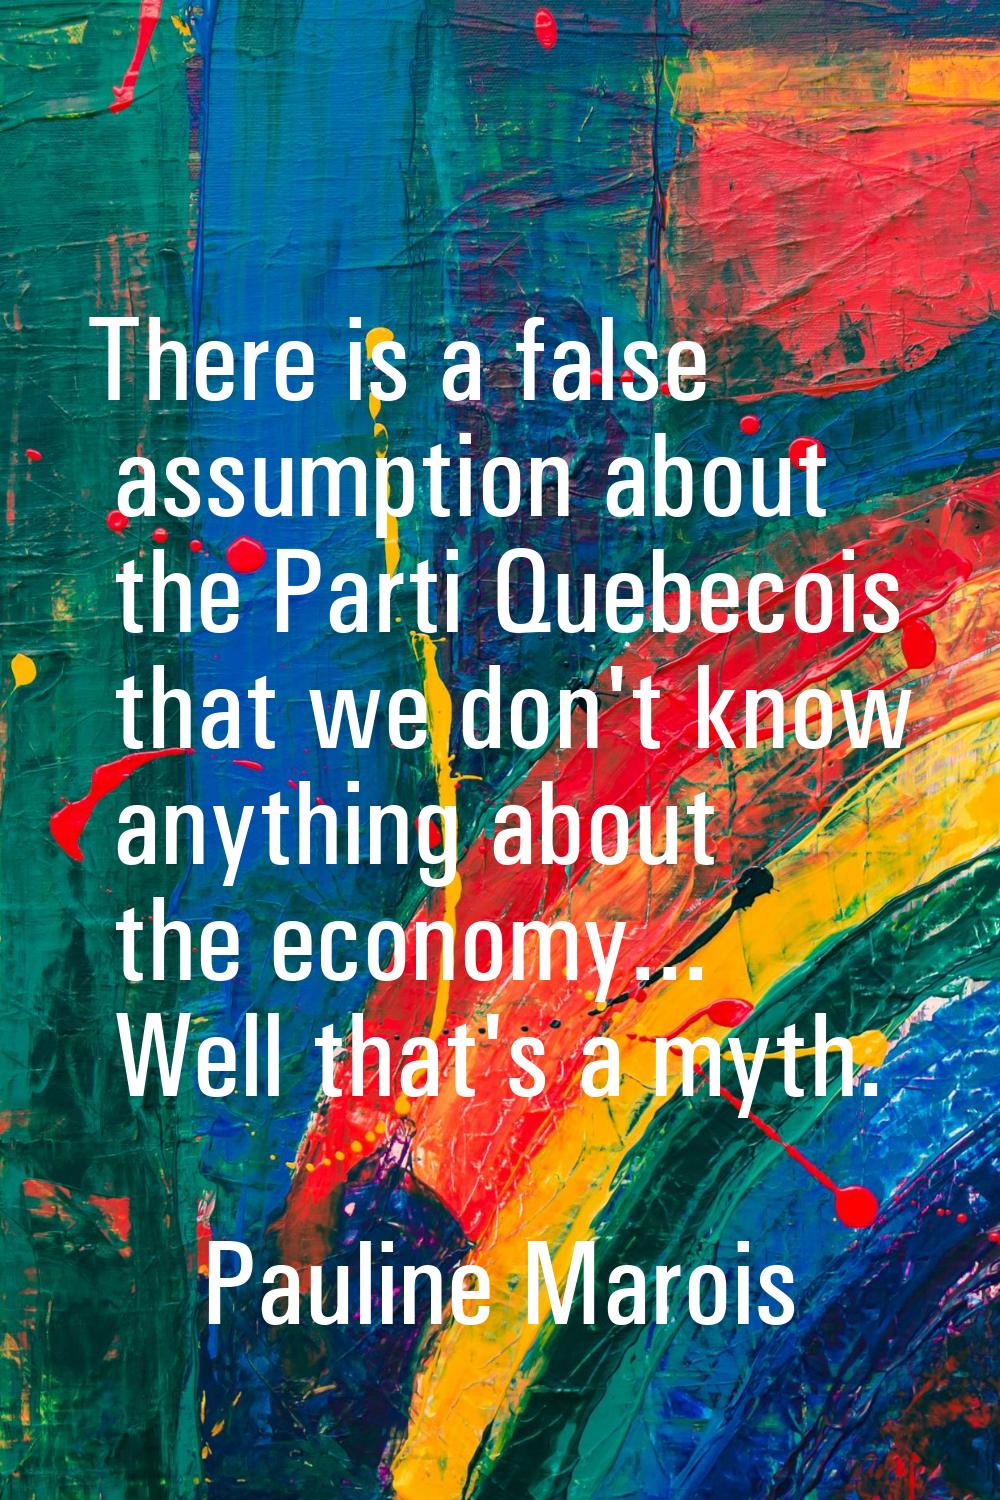 There is a false assumption about the Parti Quebecois that we don't know anything about the economy